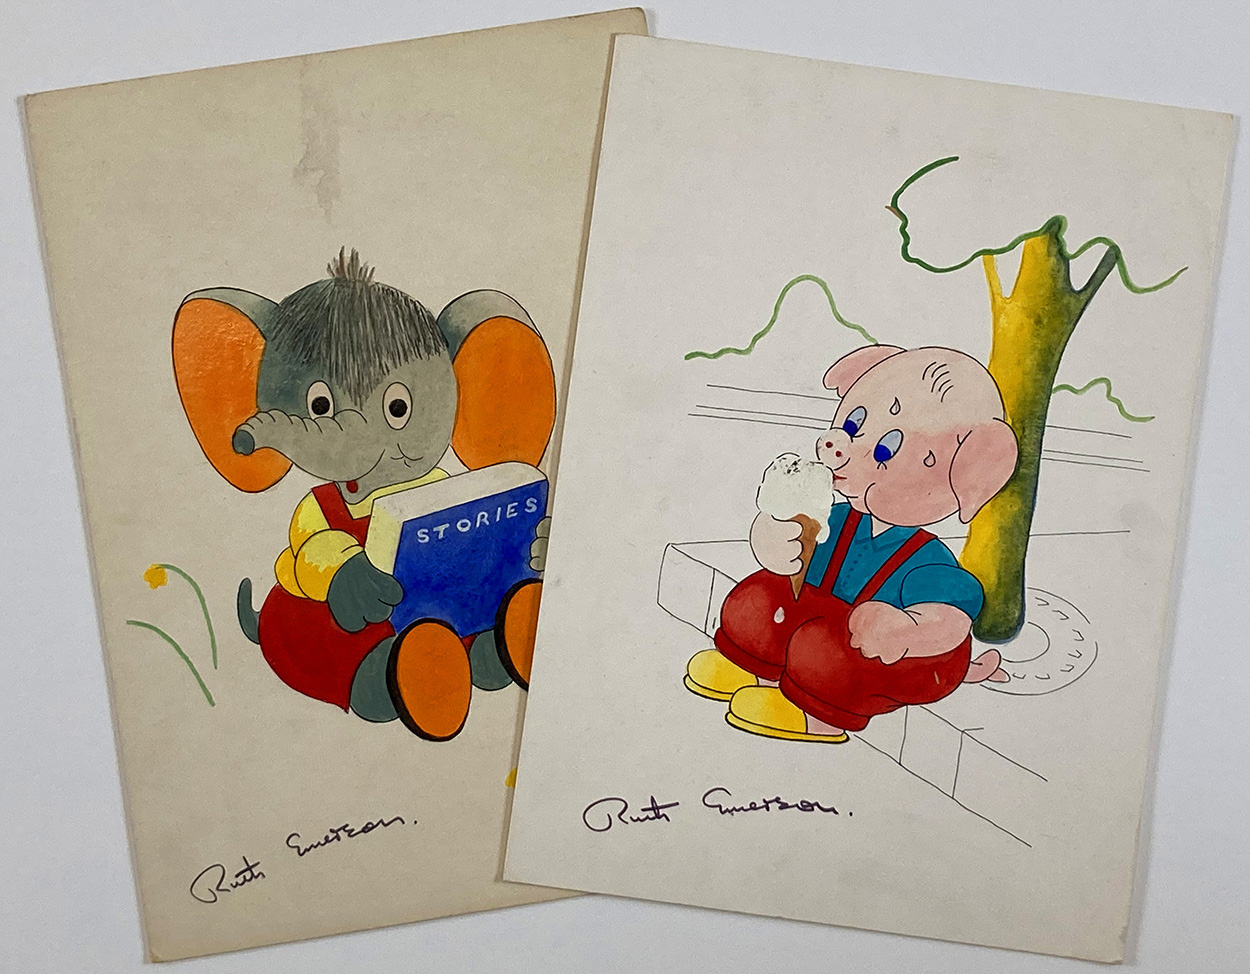 Ice Cream Piggy and Story Time Elephant (Original) (Signed) art by Ruth Emerson Art at The Illustration Art Gallery